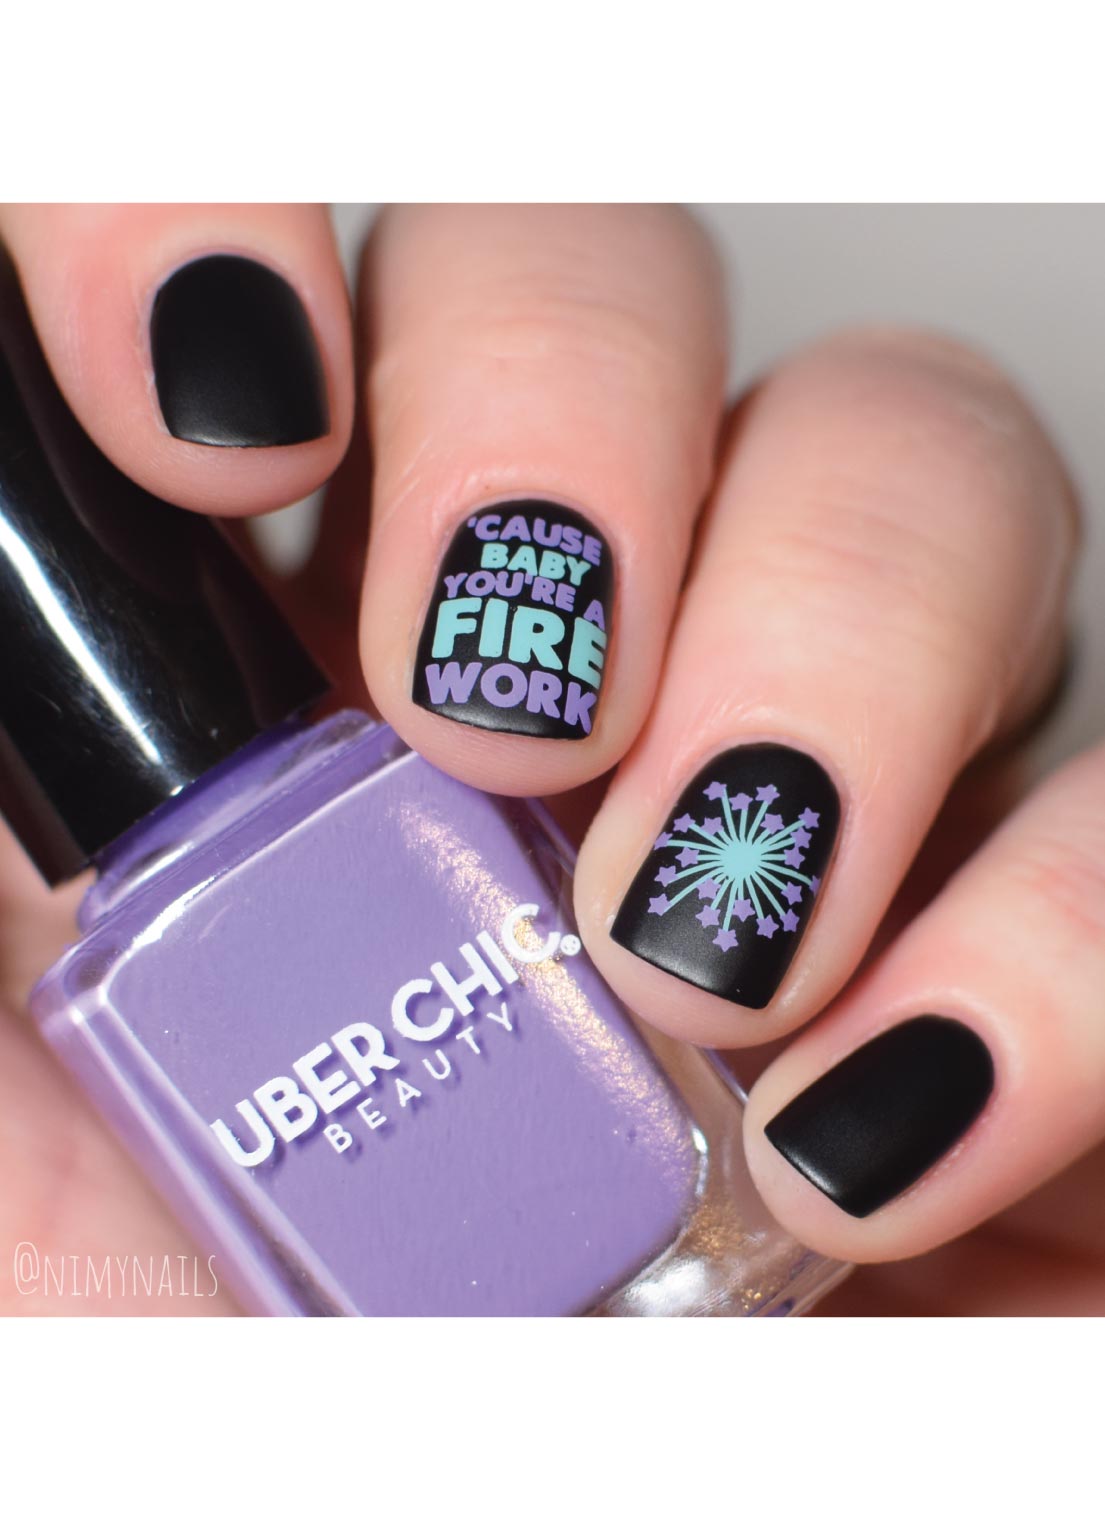 Nail Polish Society: UberChic Beauty Unicorn Love and Texture-Licious 02  Stamping Plates Review